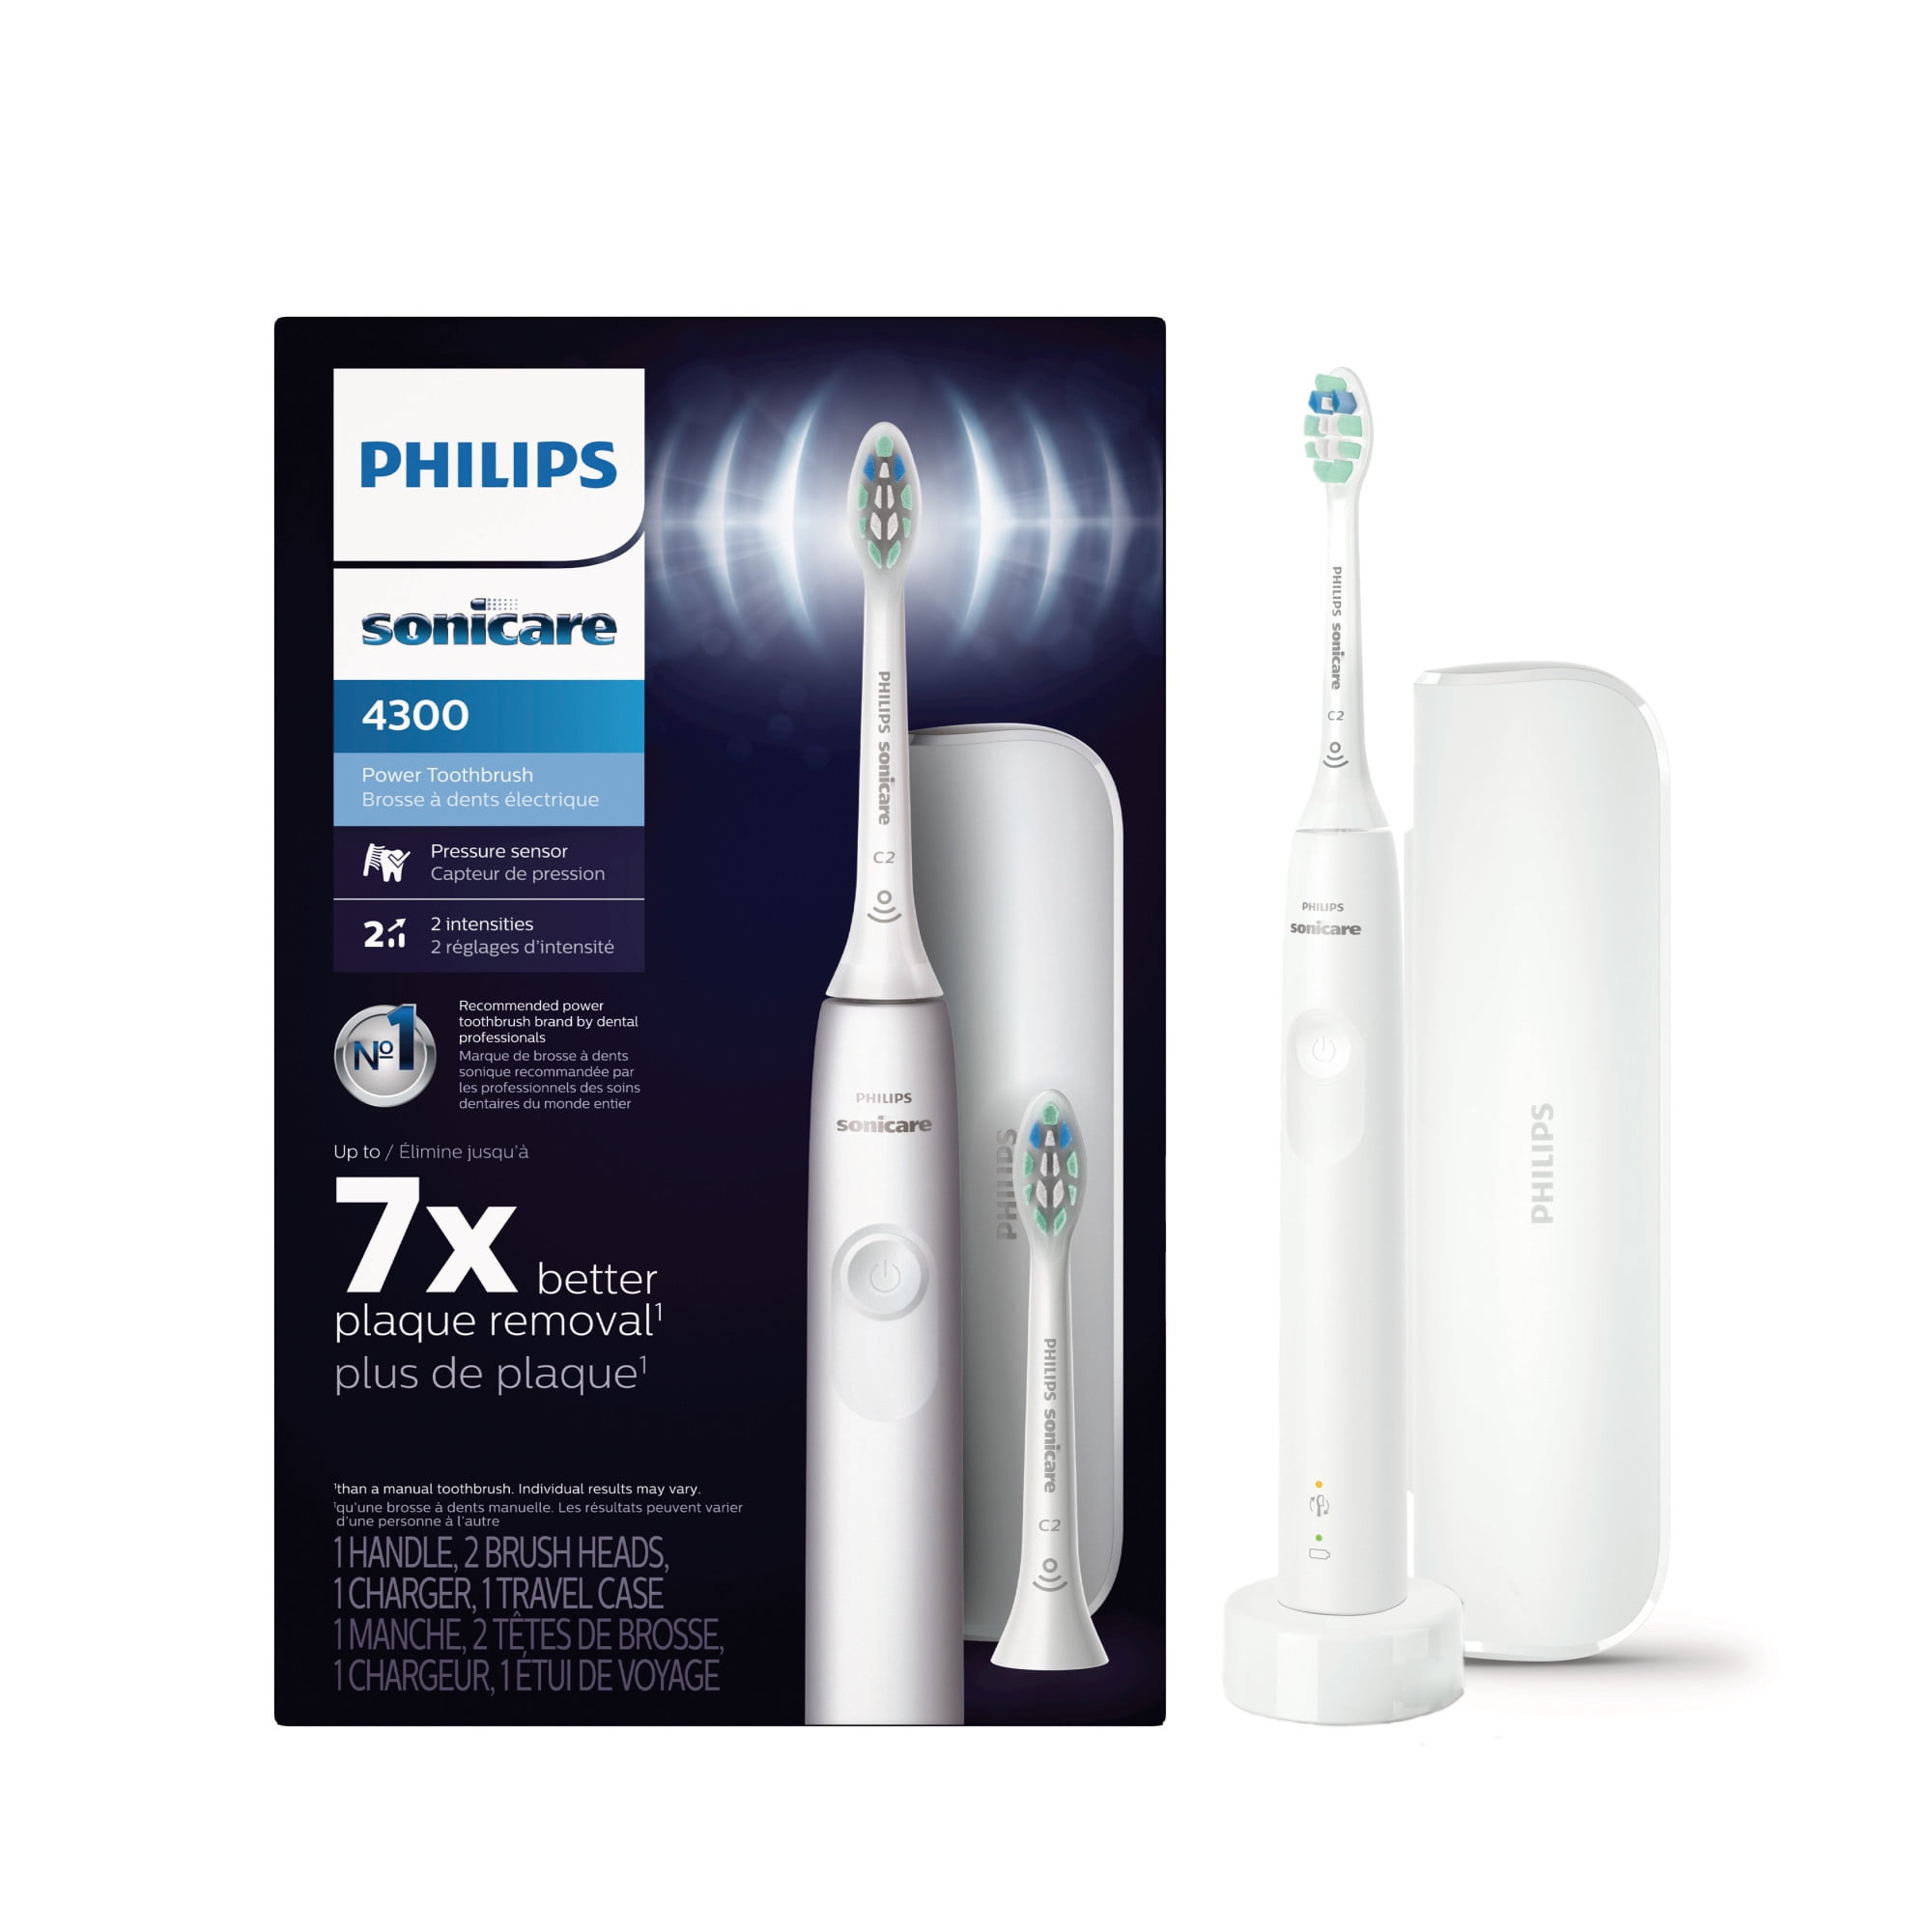 Philips Sonicare 4300 Power Toothbrush, Rechargeable Adult Electric  Toothbrush with Pressure Sensor, HX3684/23 